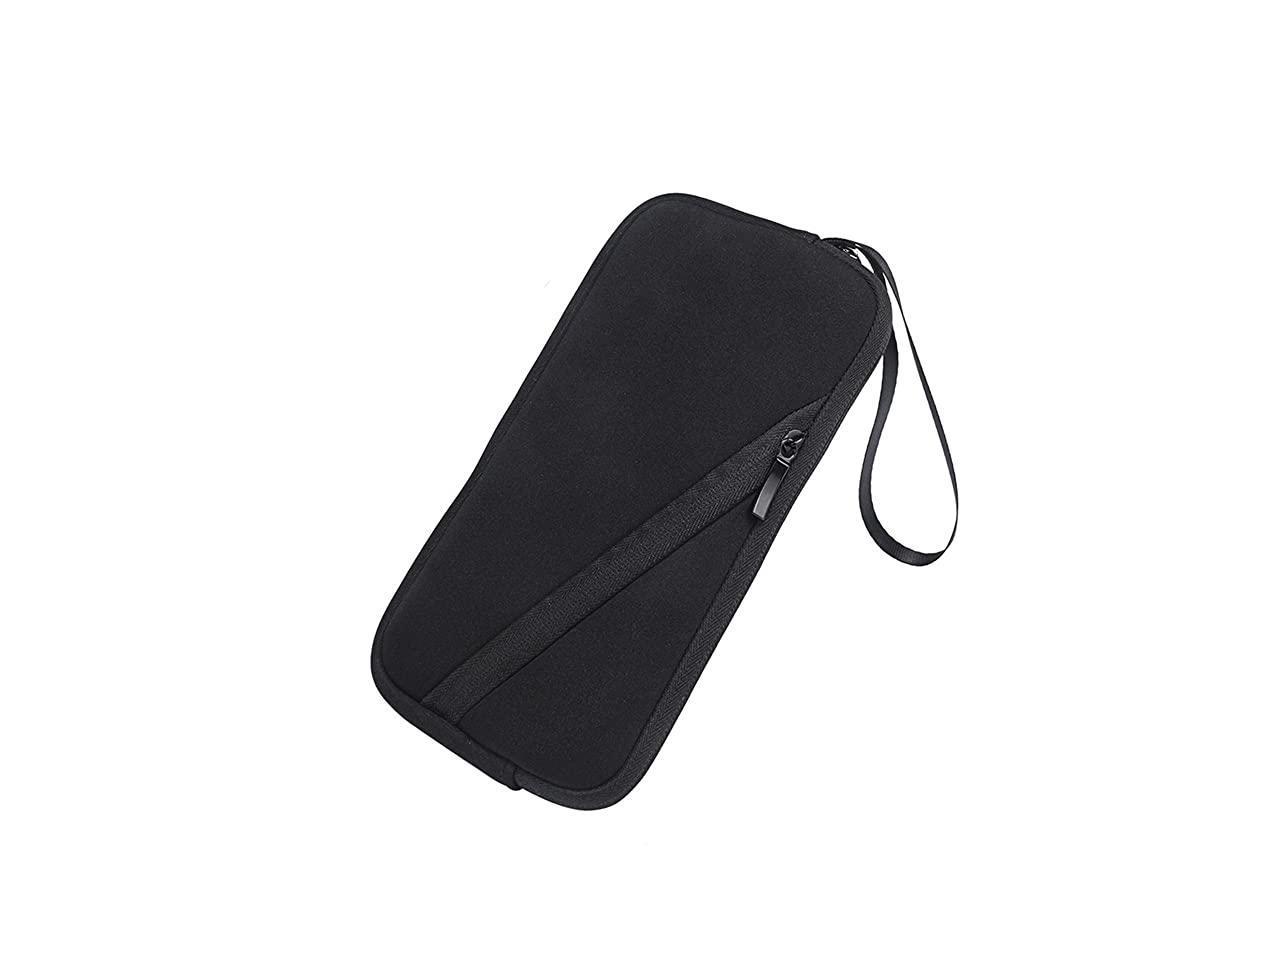 Soft Hand Case for Graphing Calculator Texas Instruments TI-84 83 85 89 Plus CE 